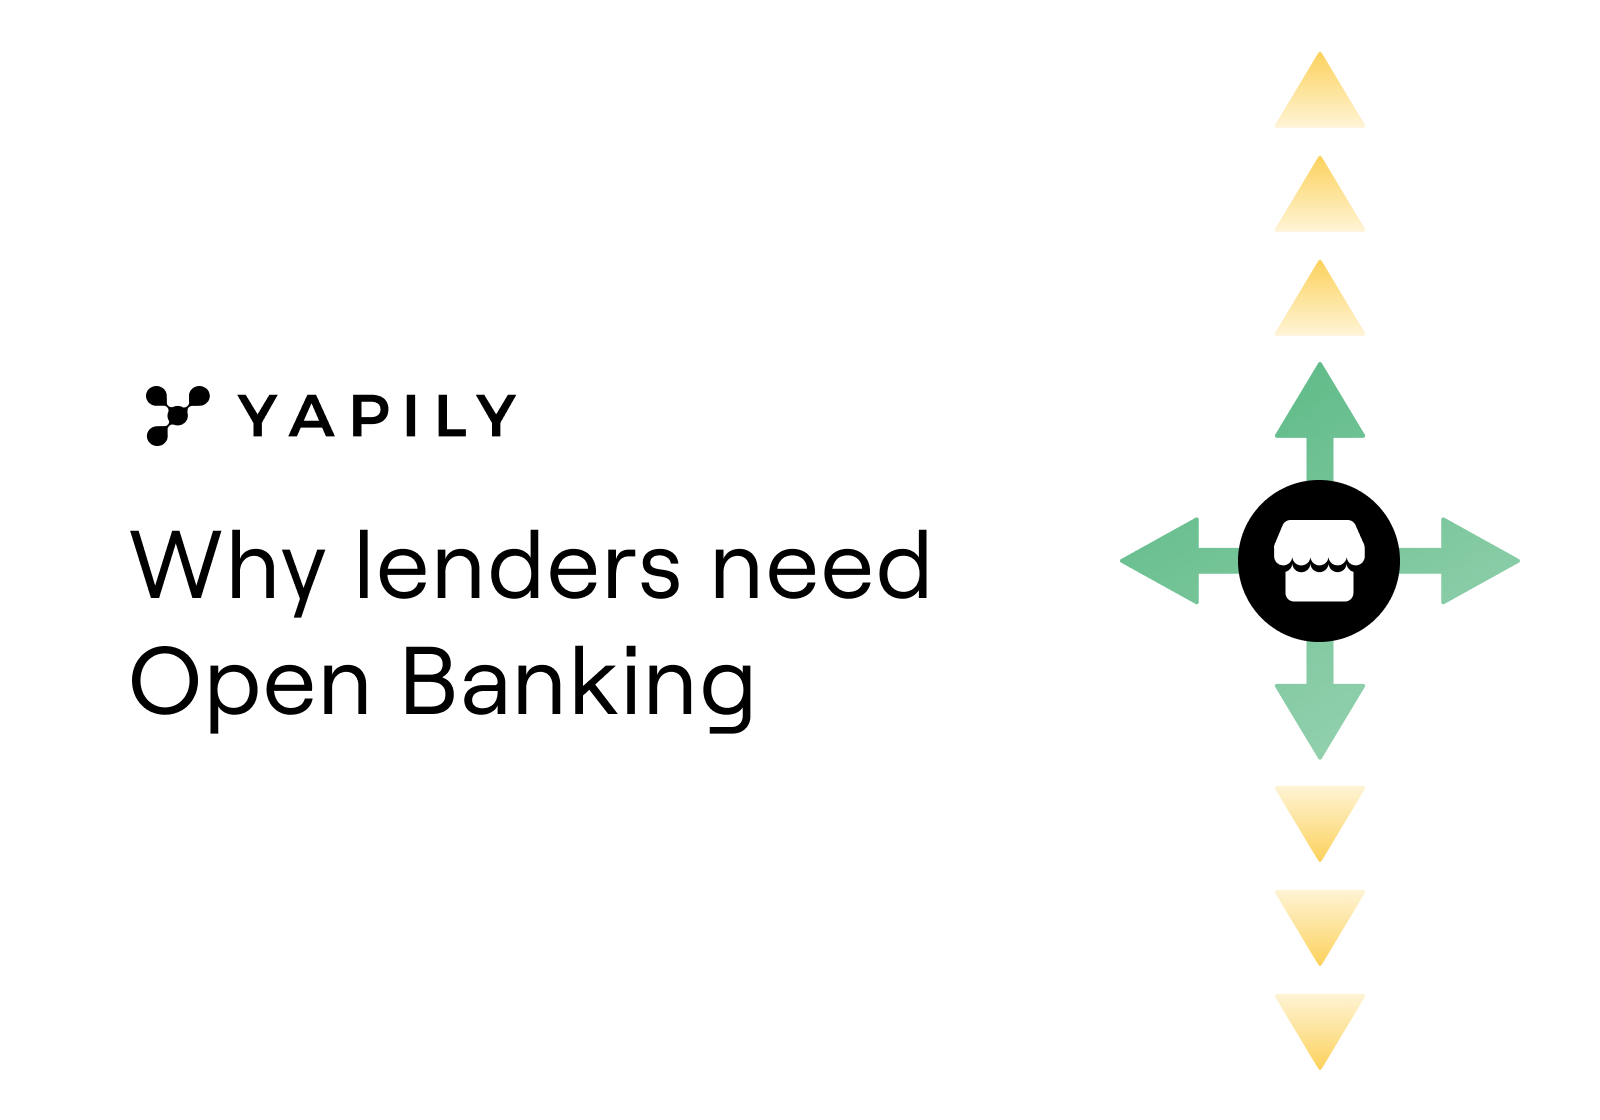 The lending industry is under immense pressure and Open Banking could provide a well needed shake up. Making financial data available for lenders to make better lending decisions and use Open Banking payments to reduce their costs.